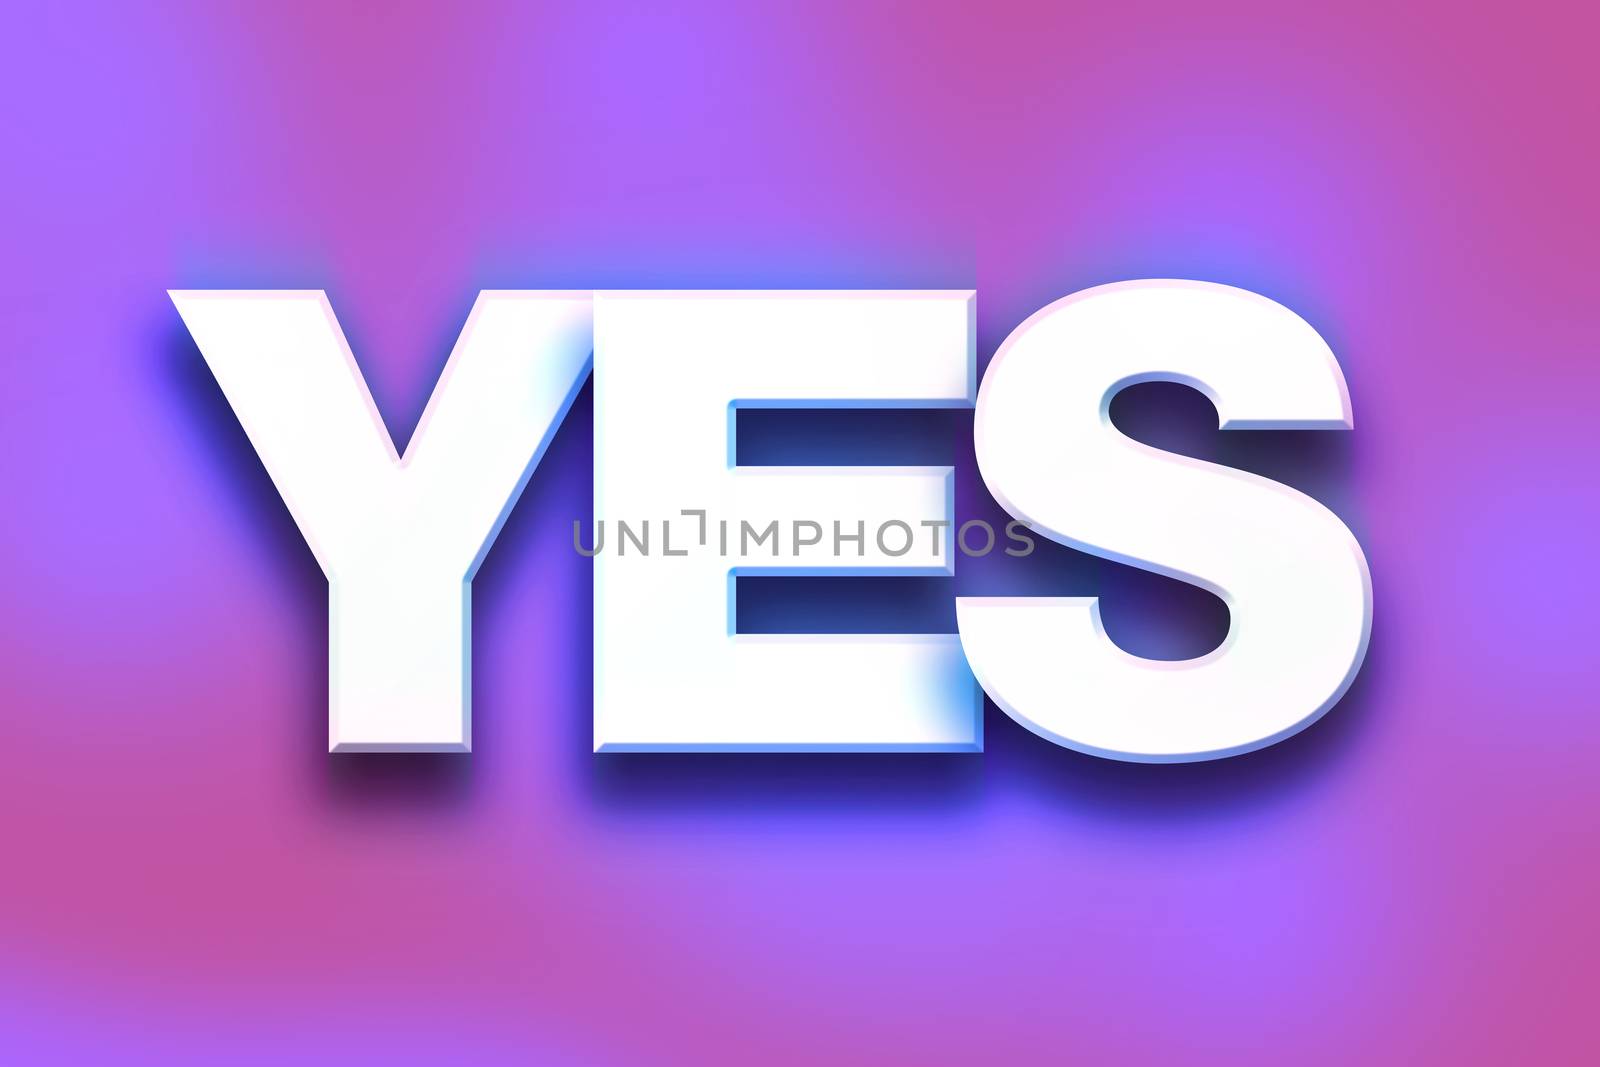 The word "Yes" written in white 3D letters on a colorful background concept and theme.